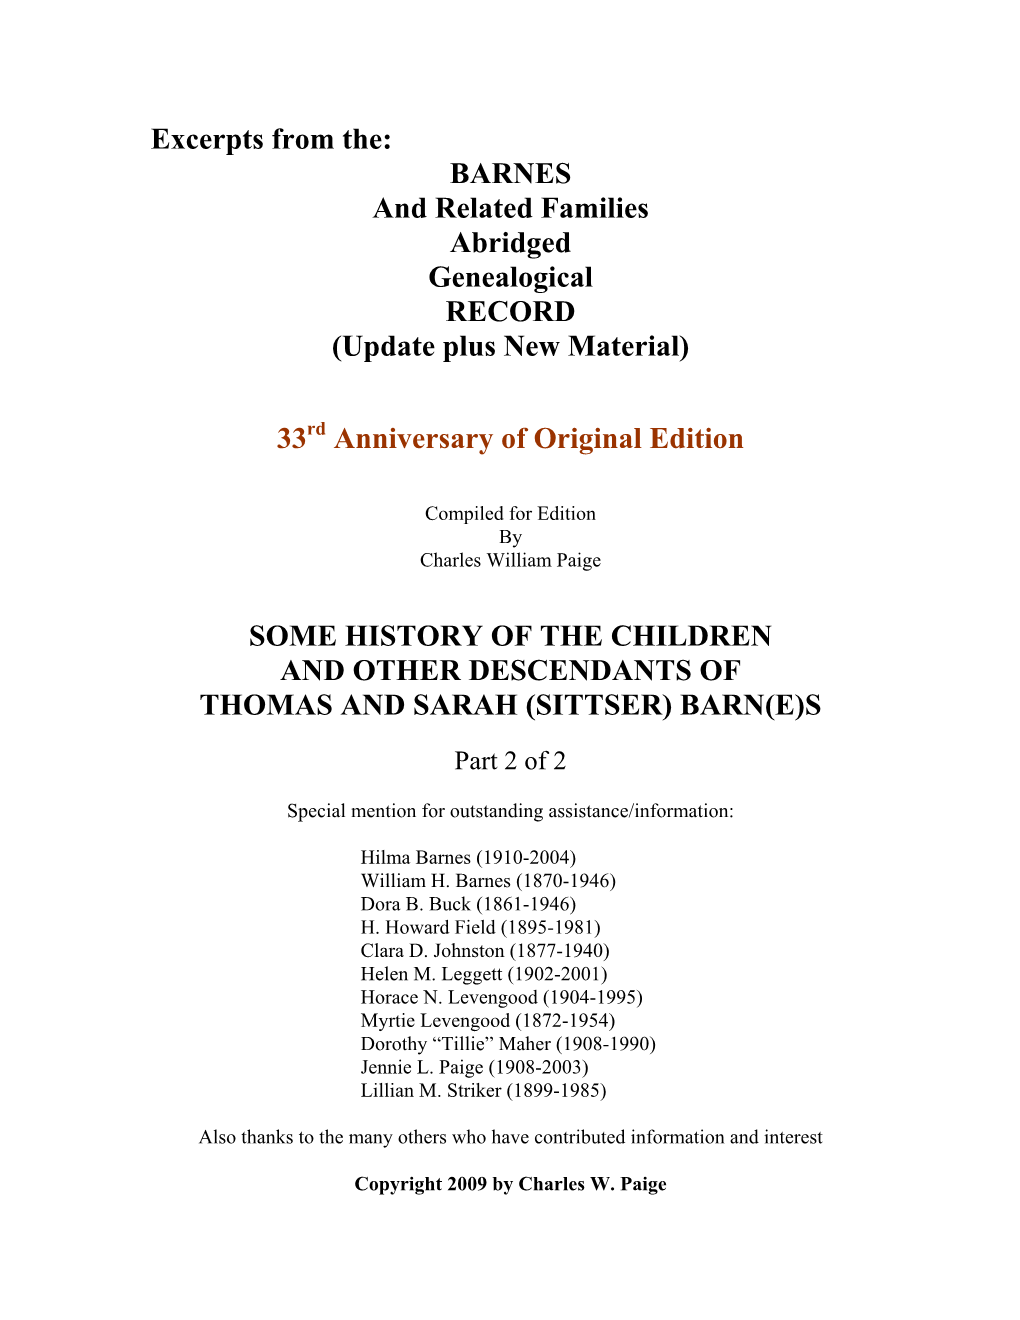 BARNES and Related Families Abridged Genealogical RECORD (Update Plus New Material)